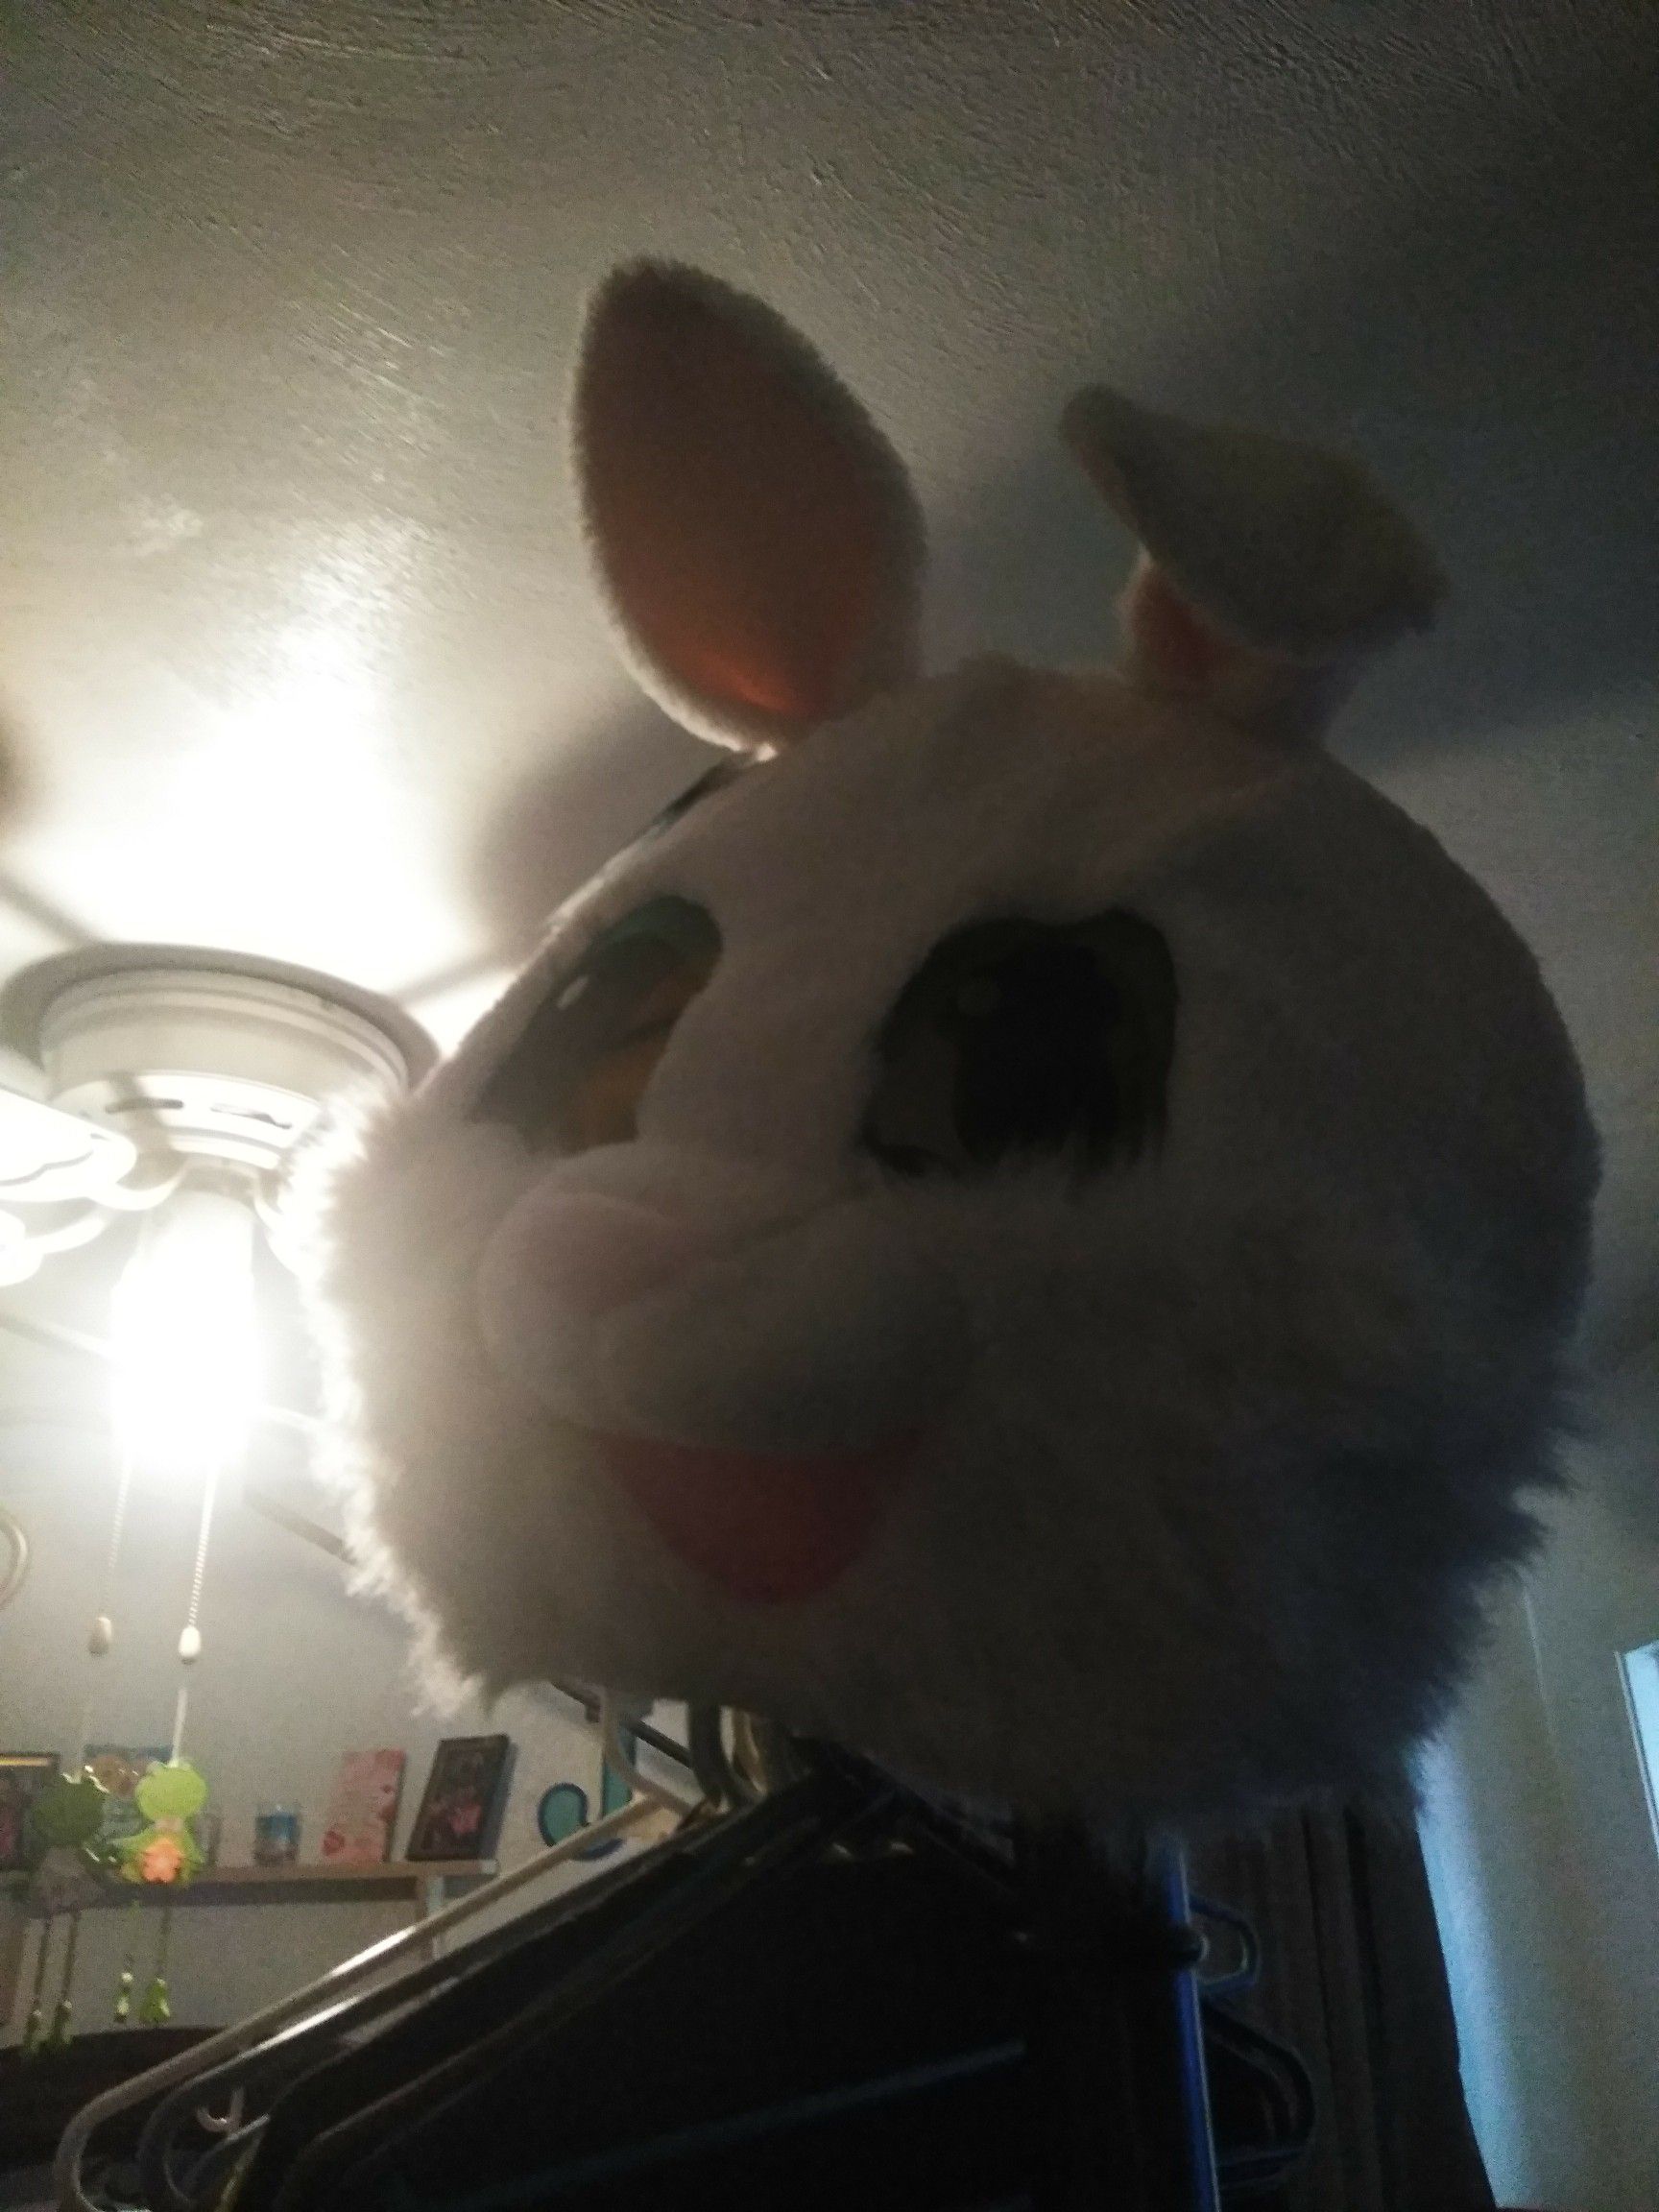 I have Easter bunny costume $50